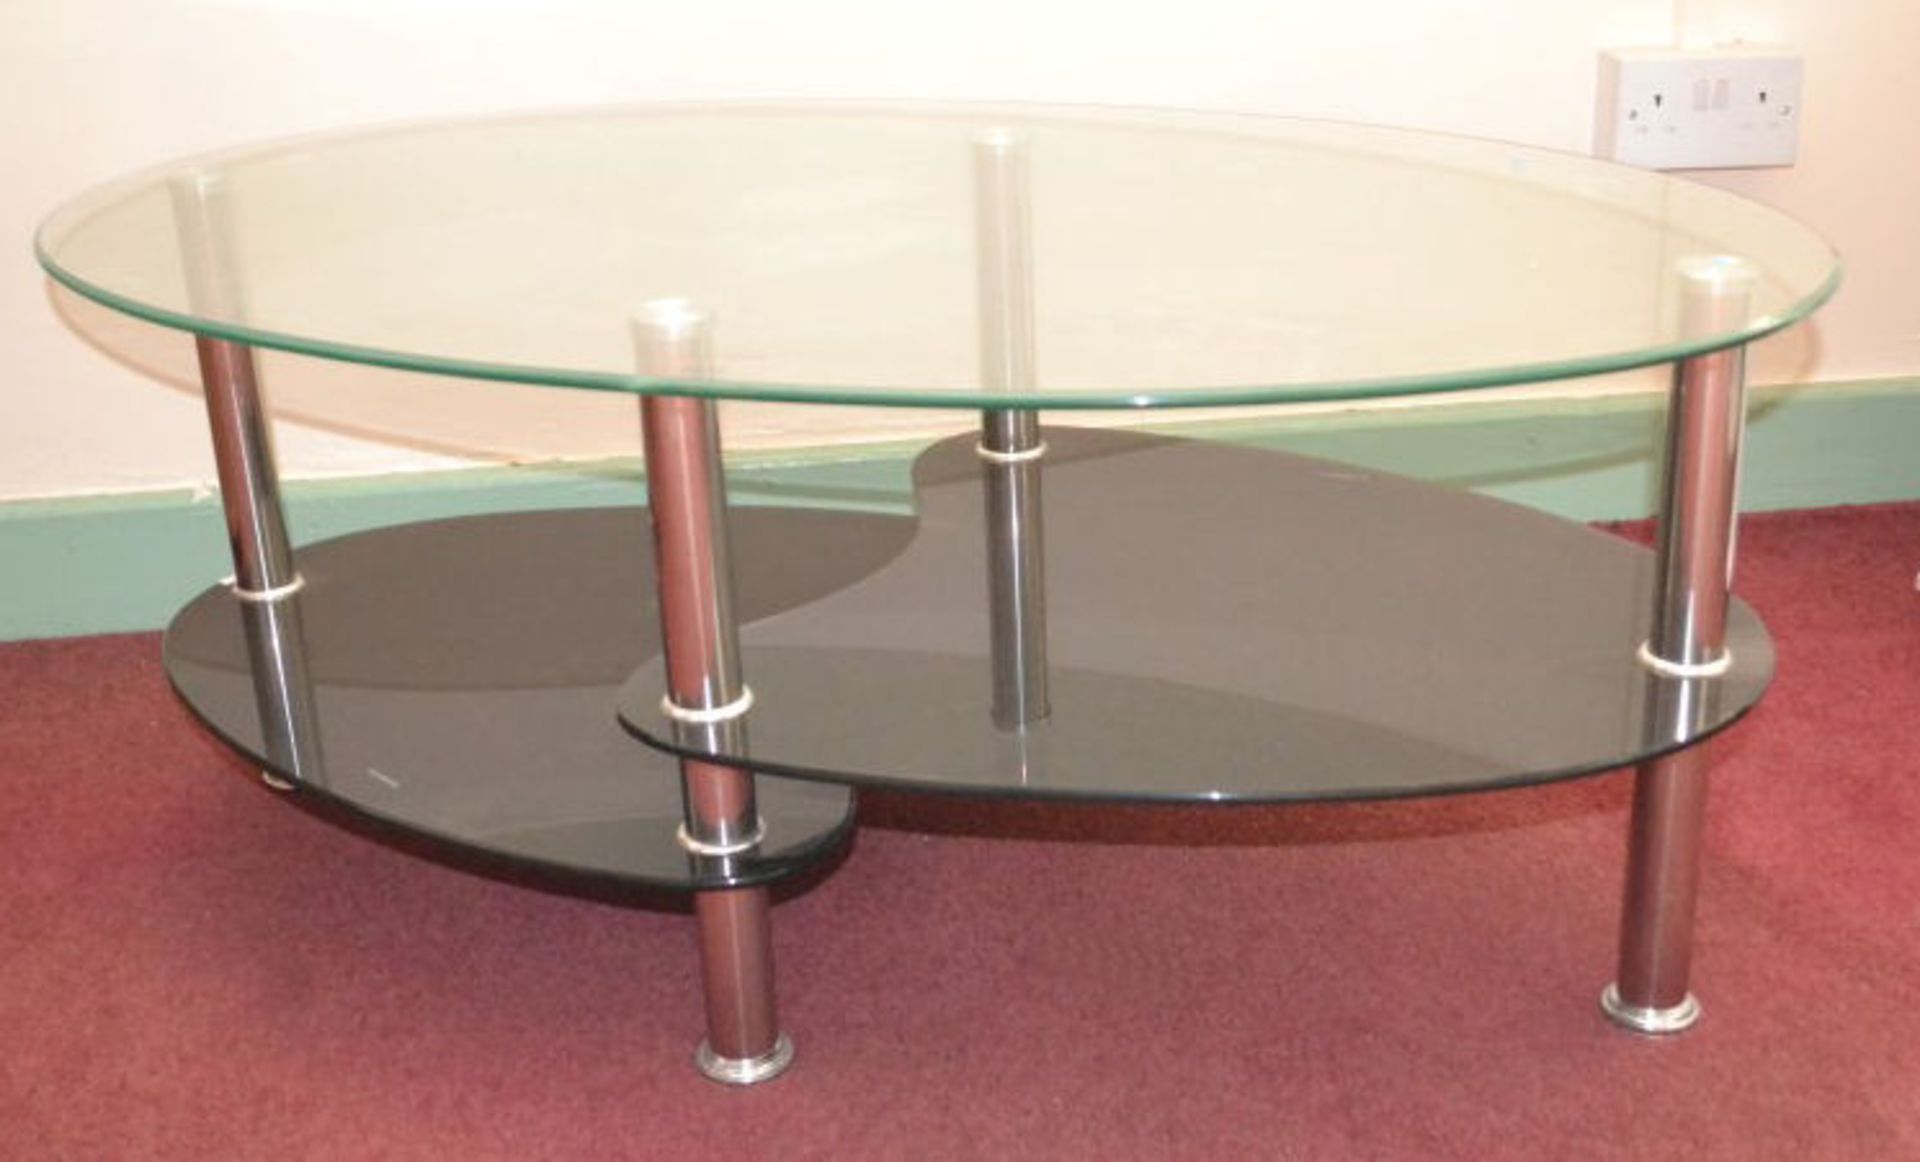 1 x Contemporary Oval Glass and Stainless Steel Coffee Table With 2 Tiered Shelves